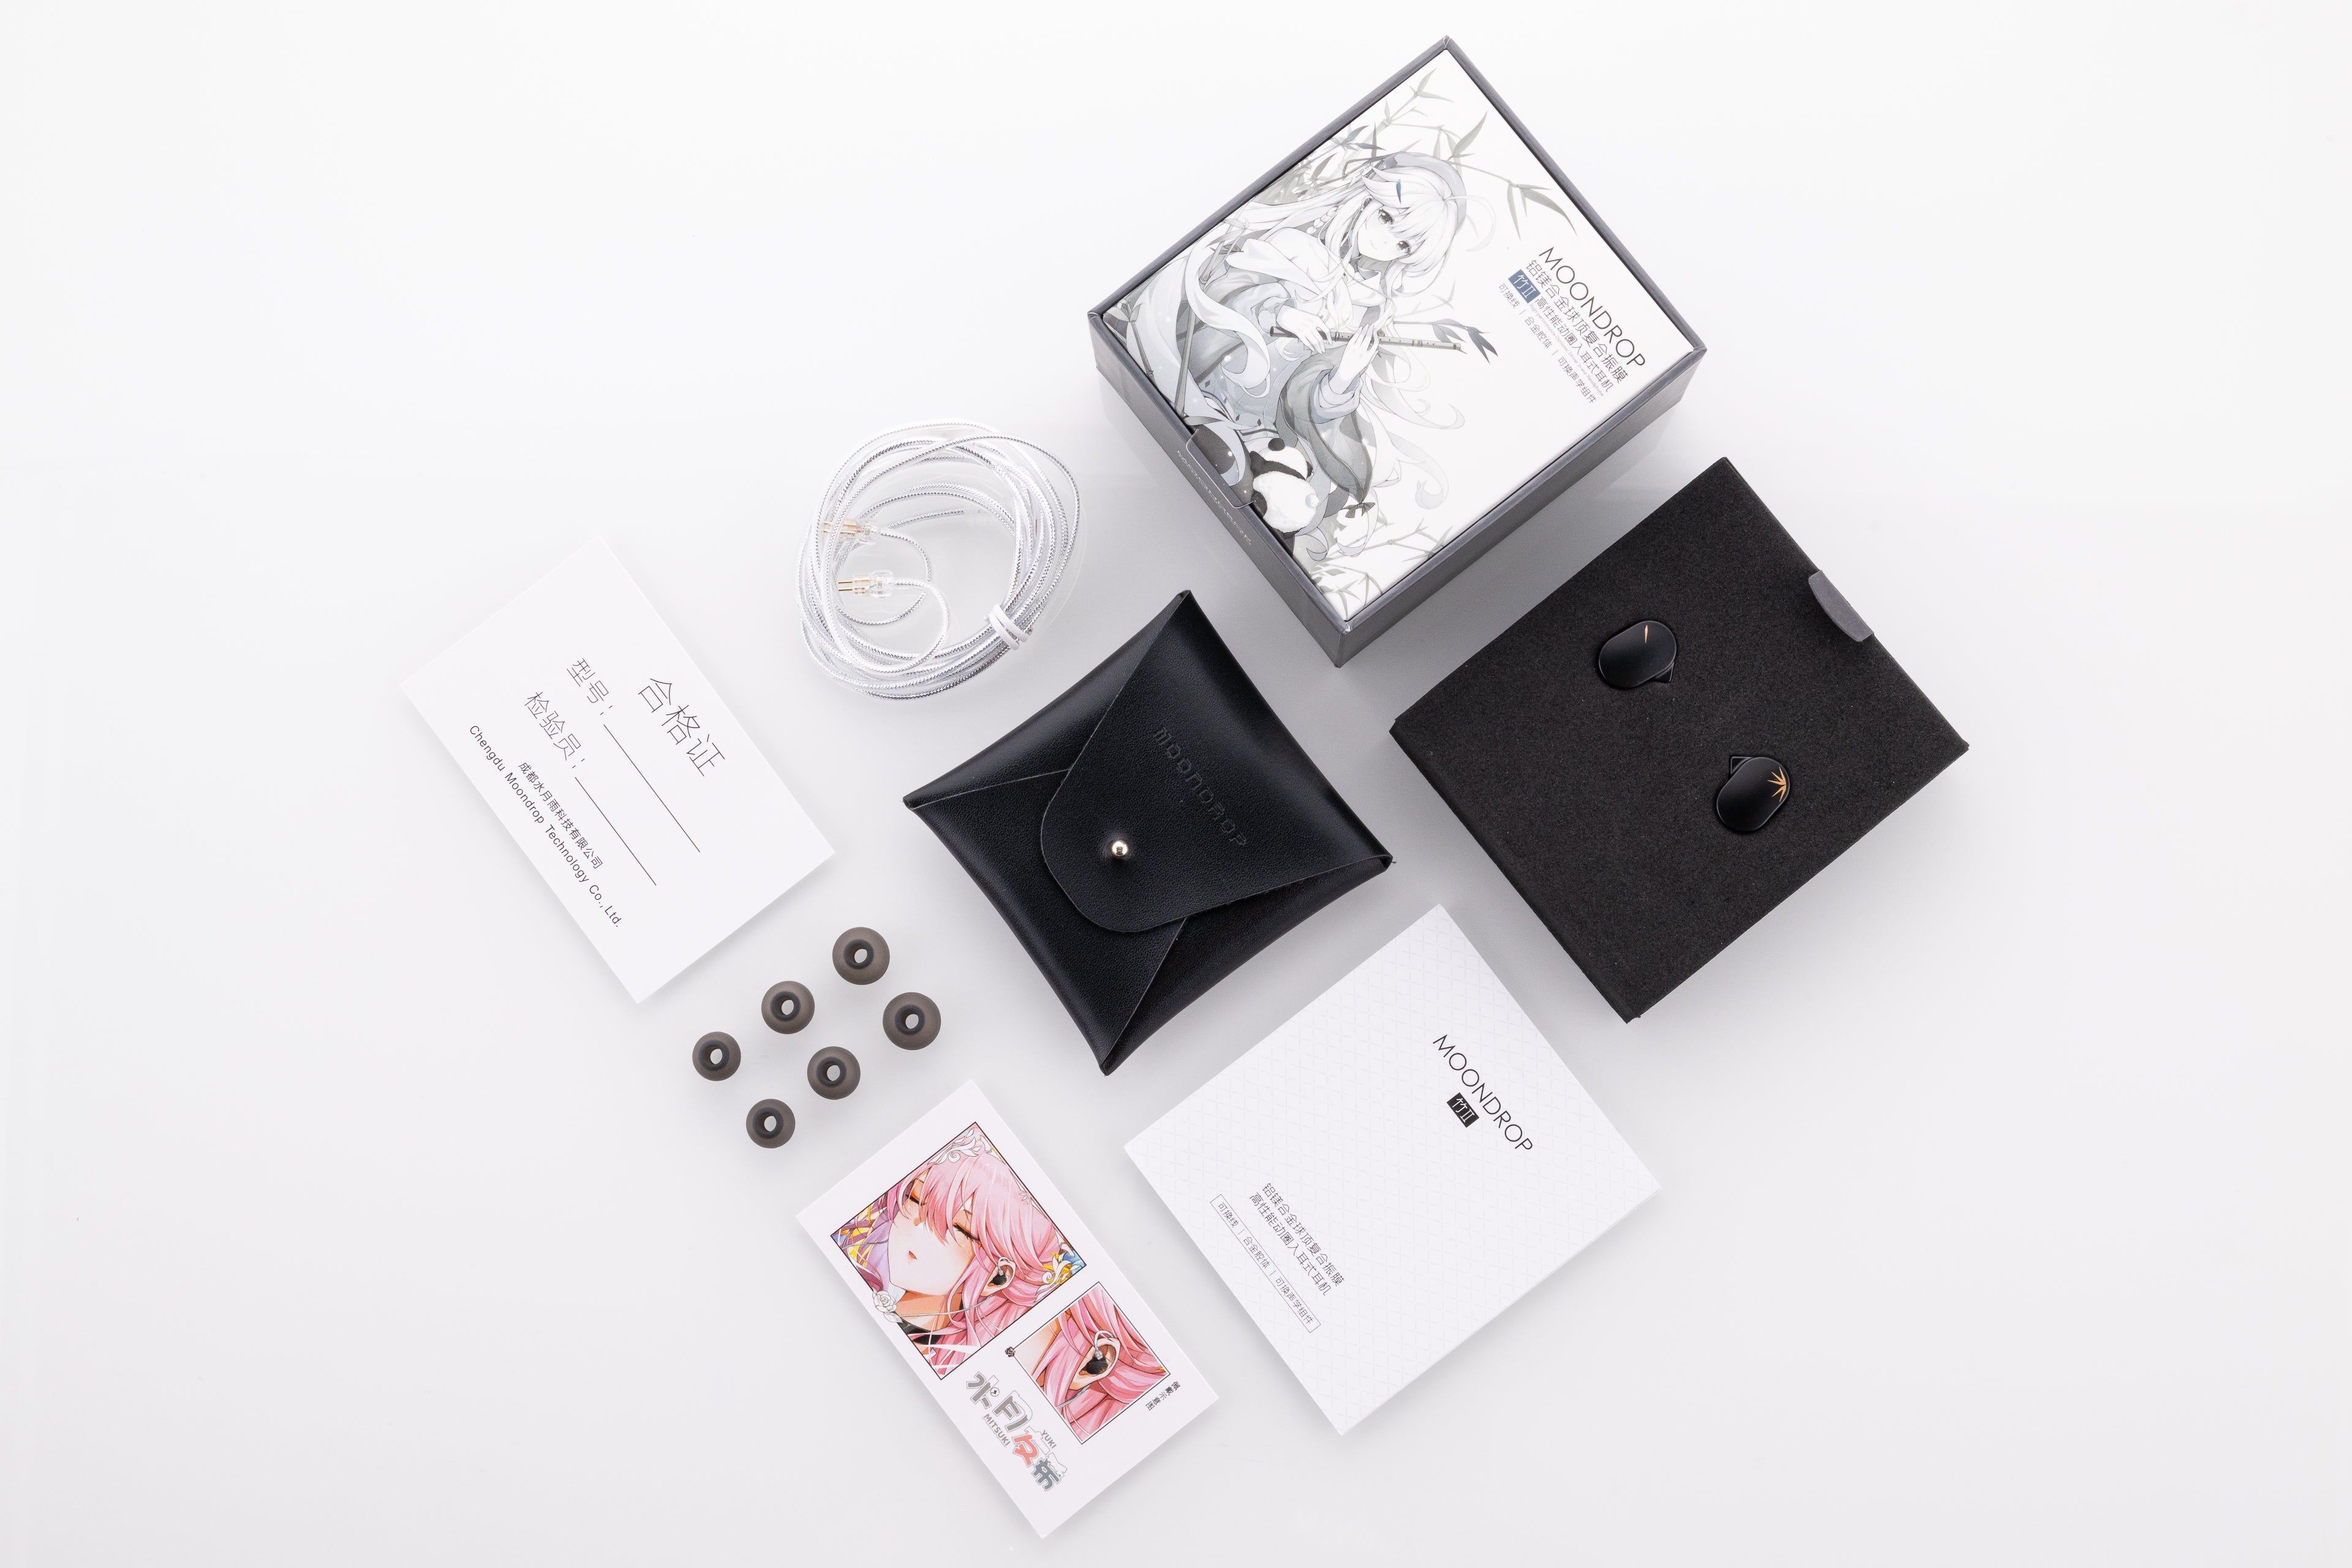 [5% off + 50% off for Spinfit] Moondrop Chu II Chu 2 - Wired IEM earphone with 10mm Dynamic Driver